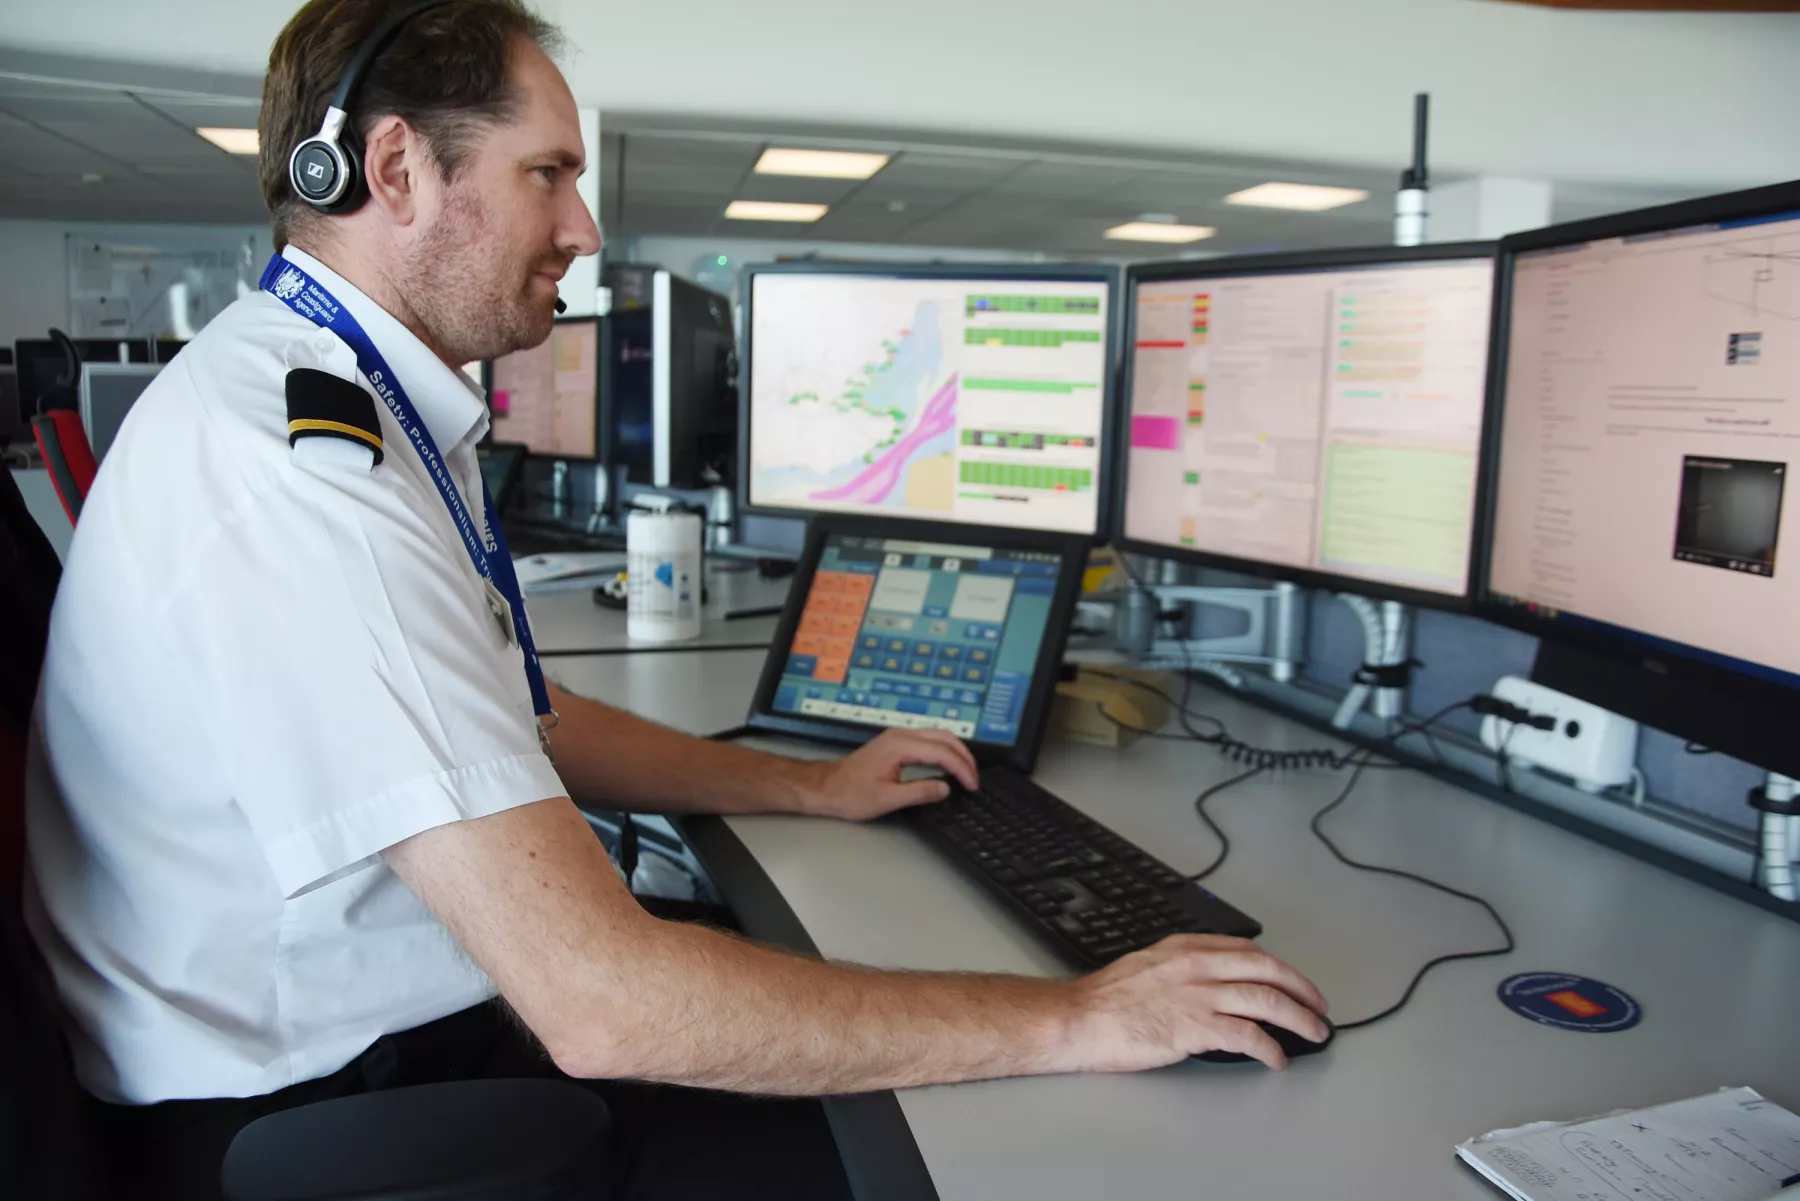 A Vessel Traffic Service Operator working at the Coastguard Operations Centre in Dover.